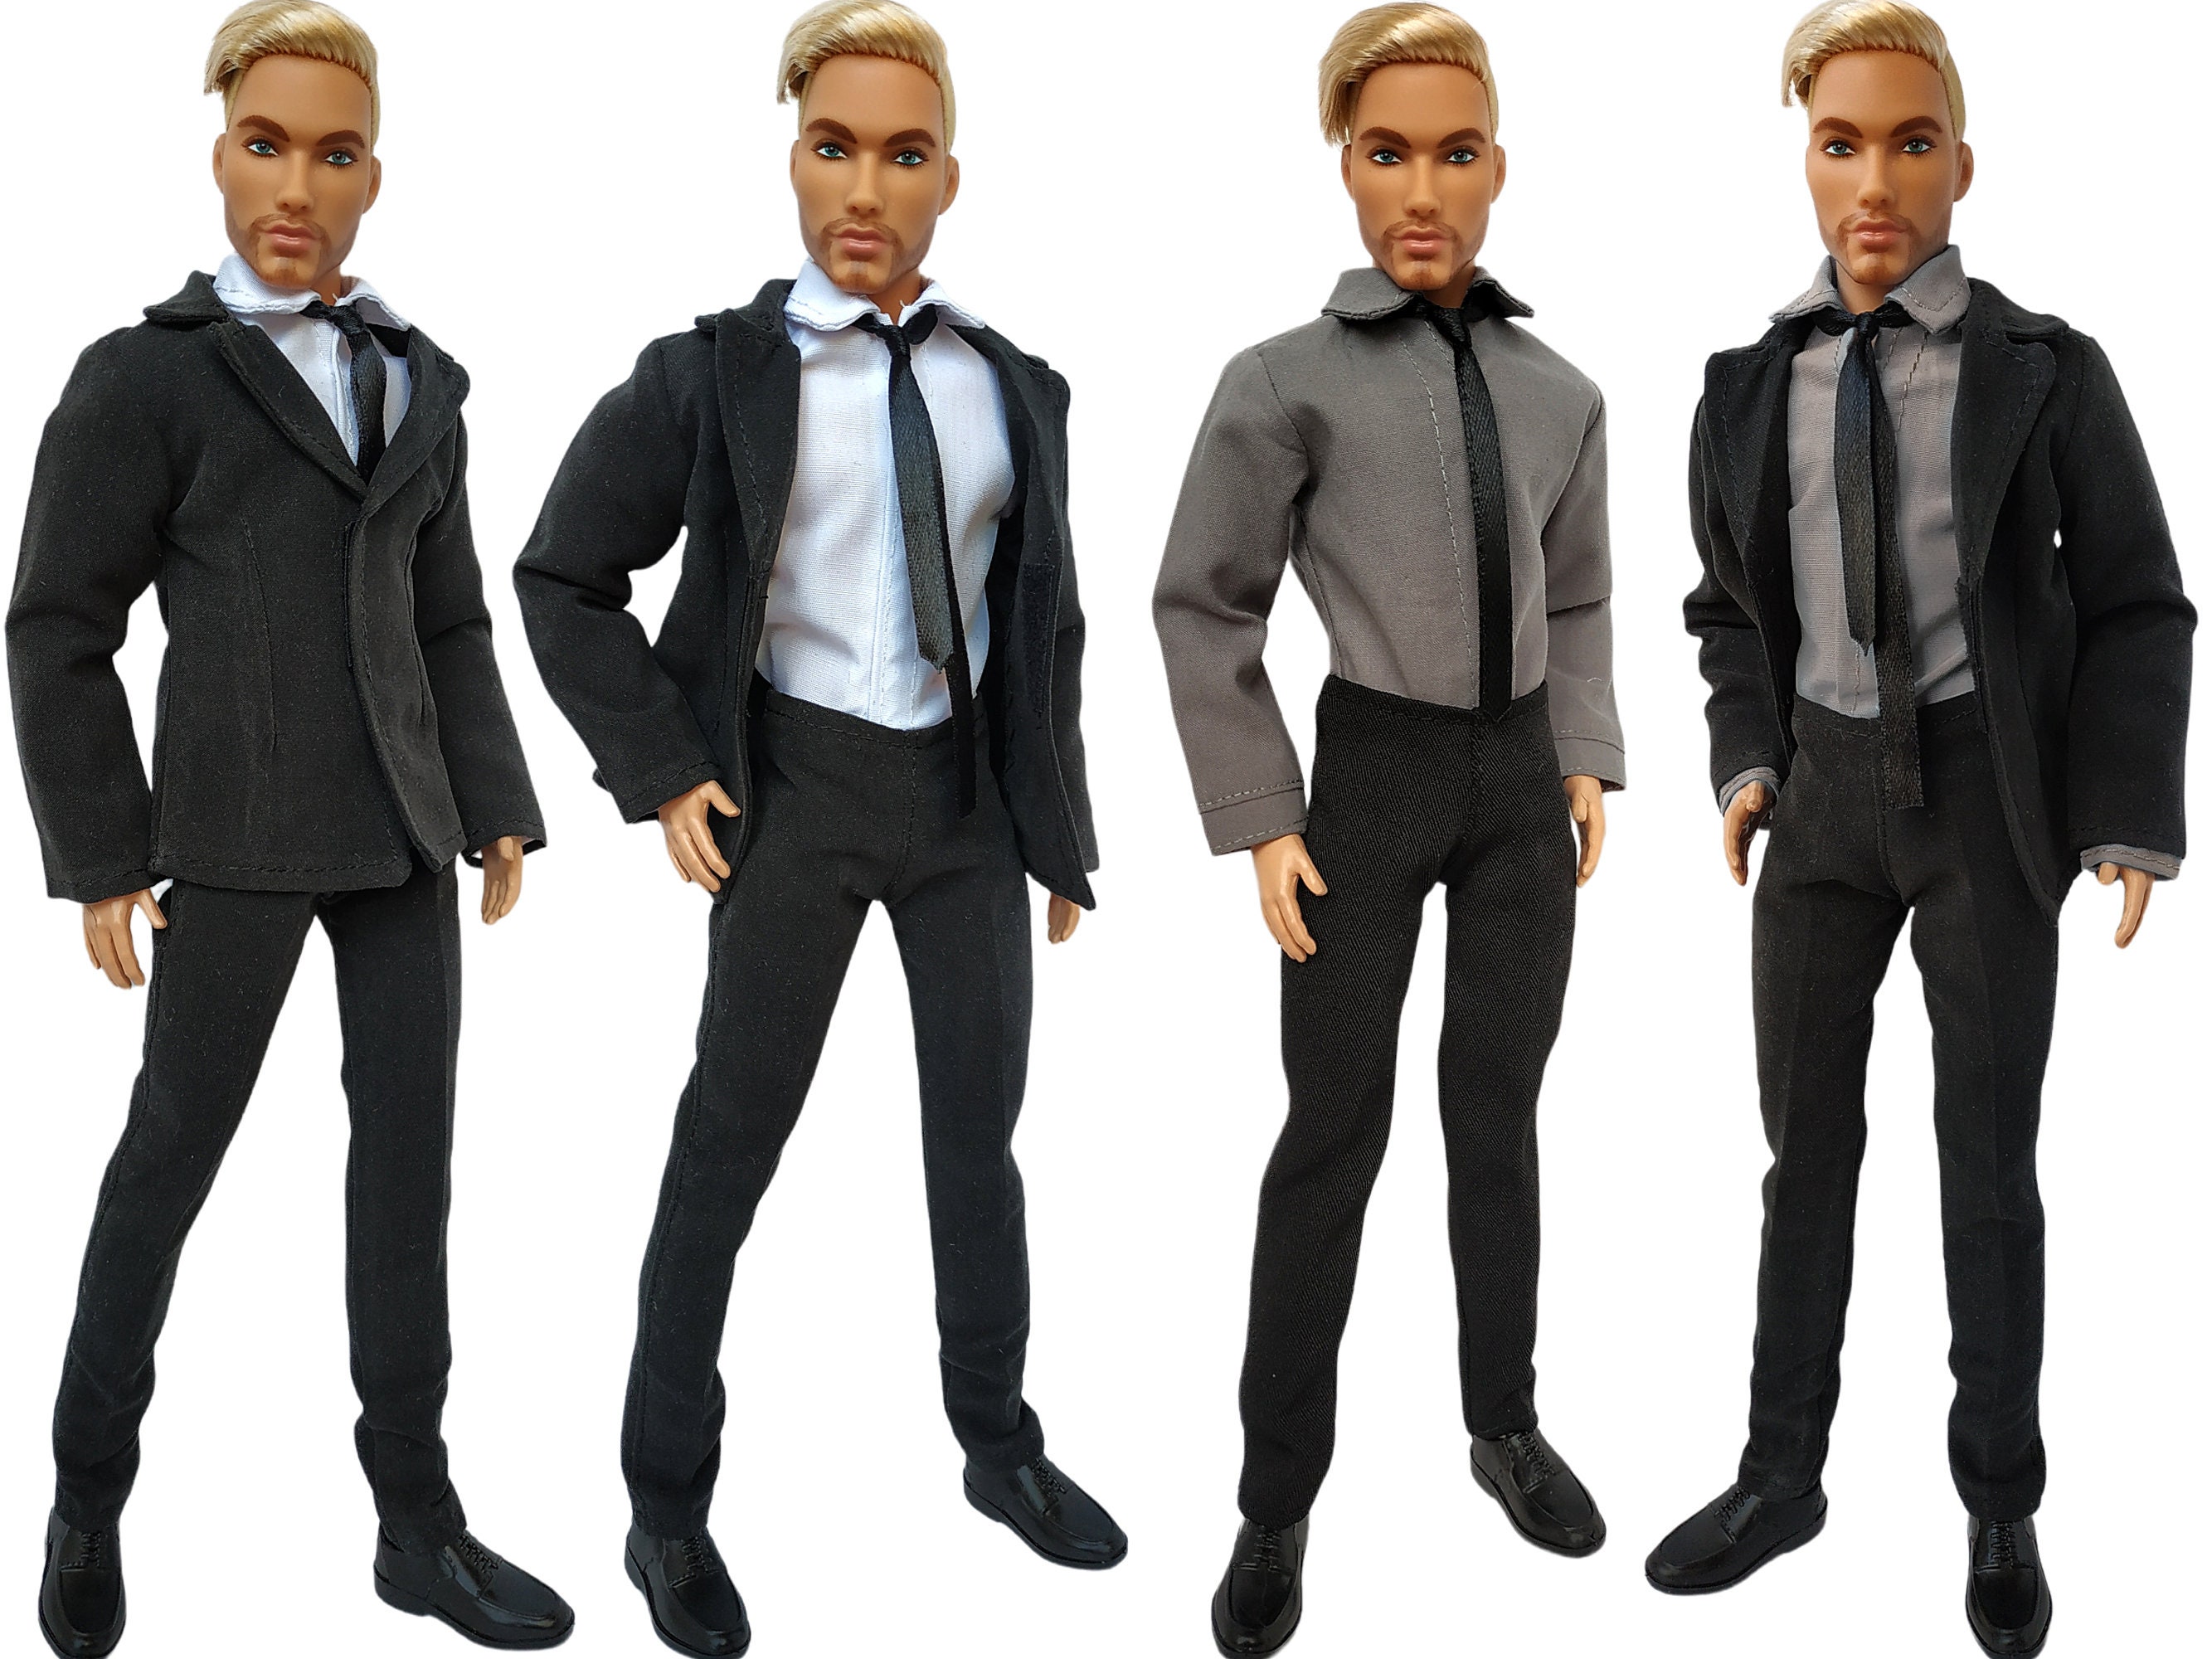 1/12 Scale Miniature Male Doll Work Cargo Pants and Sleeveless Tank Top  Outfits Classic Casual Suit for 1/12 Soldier Figures BJD Doll Body Black 